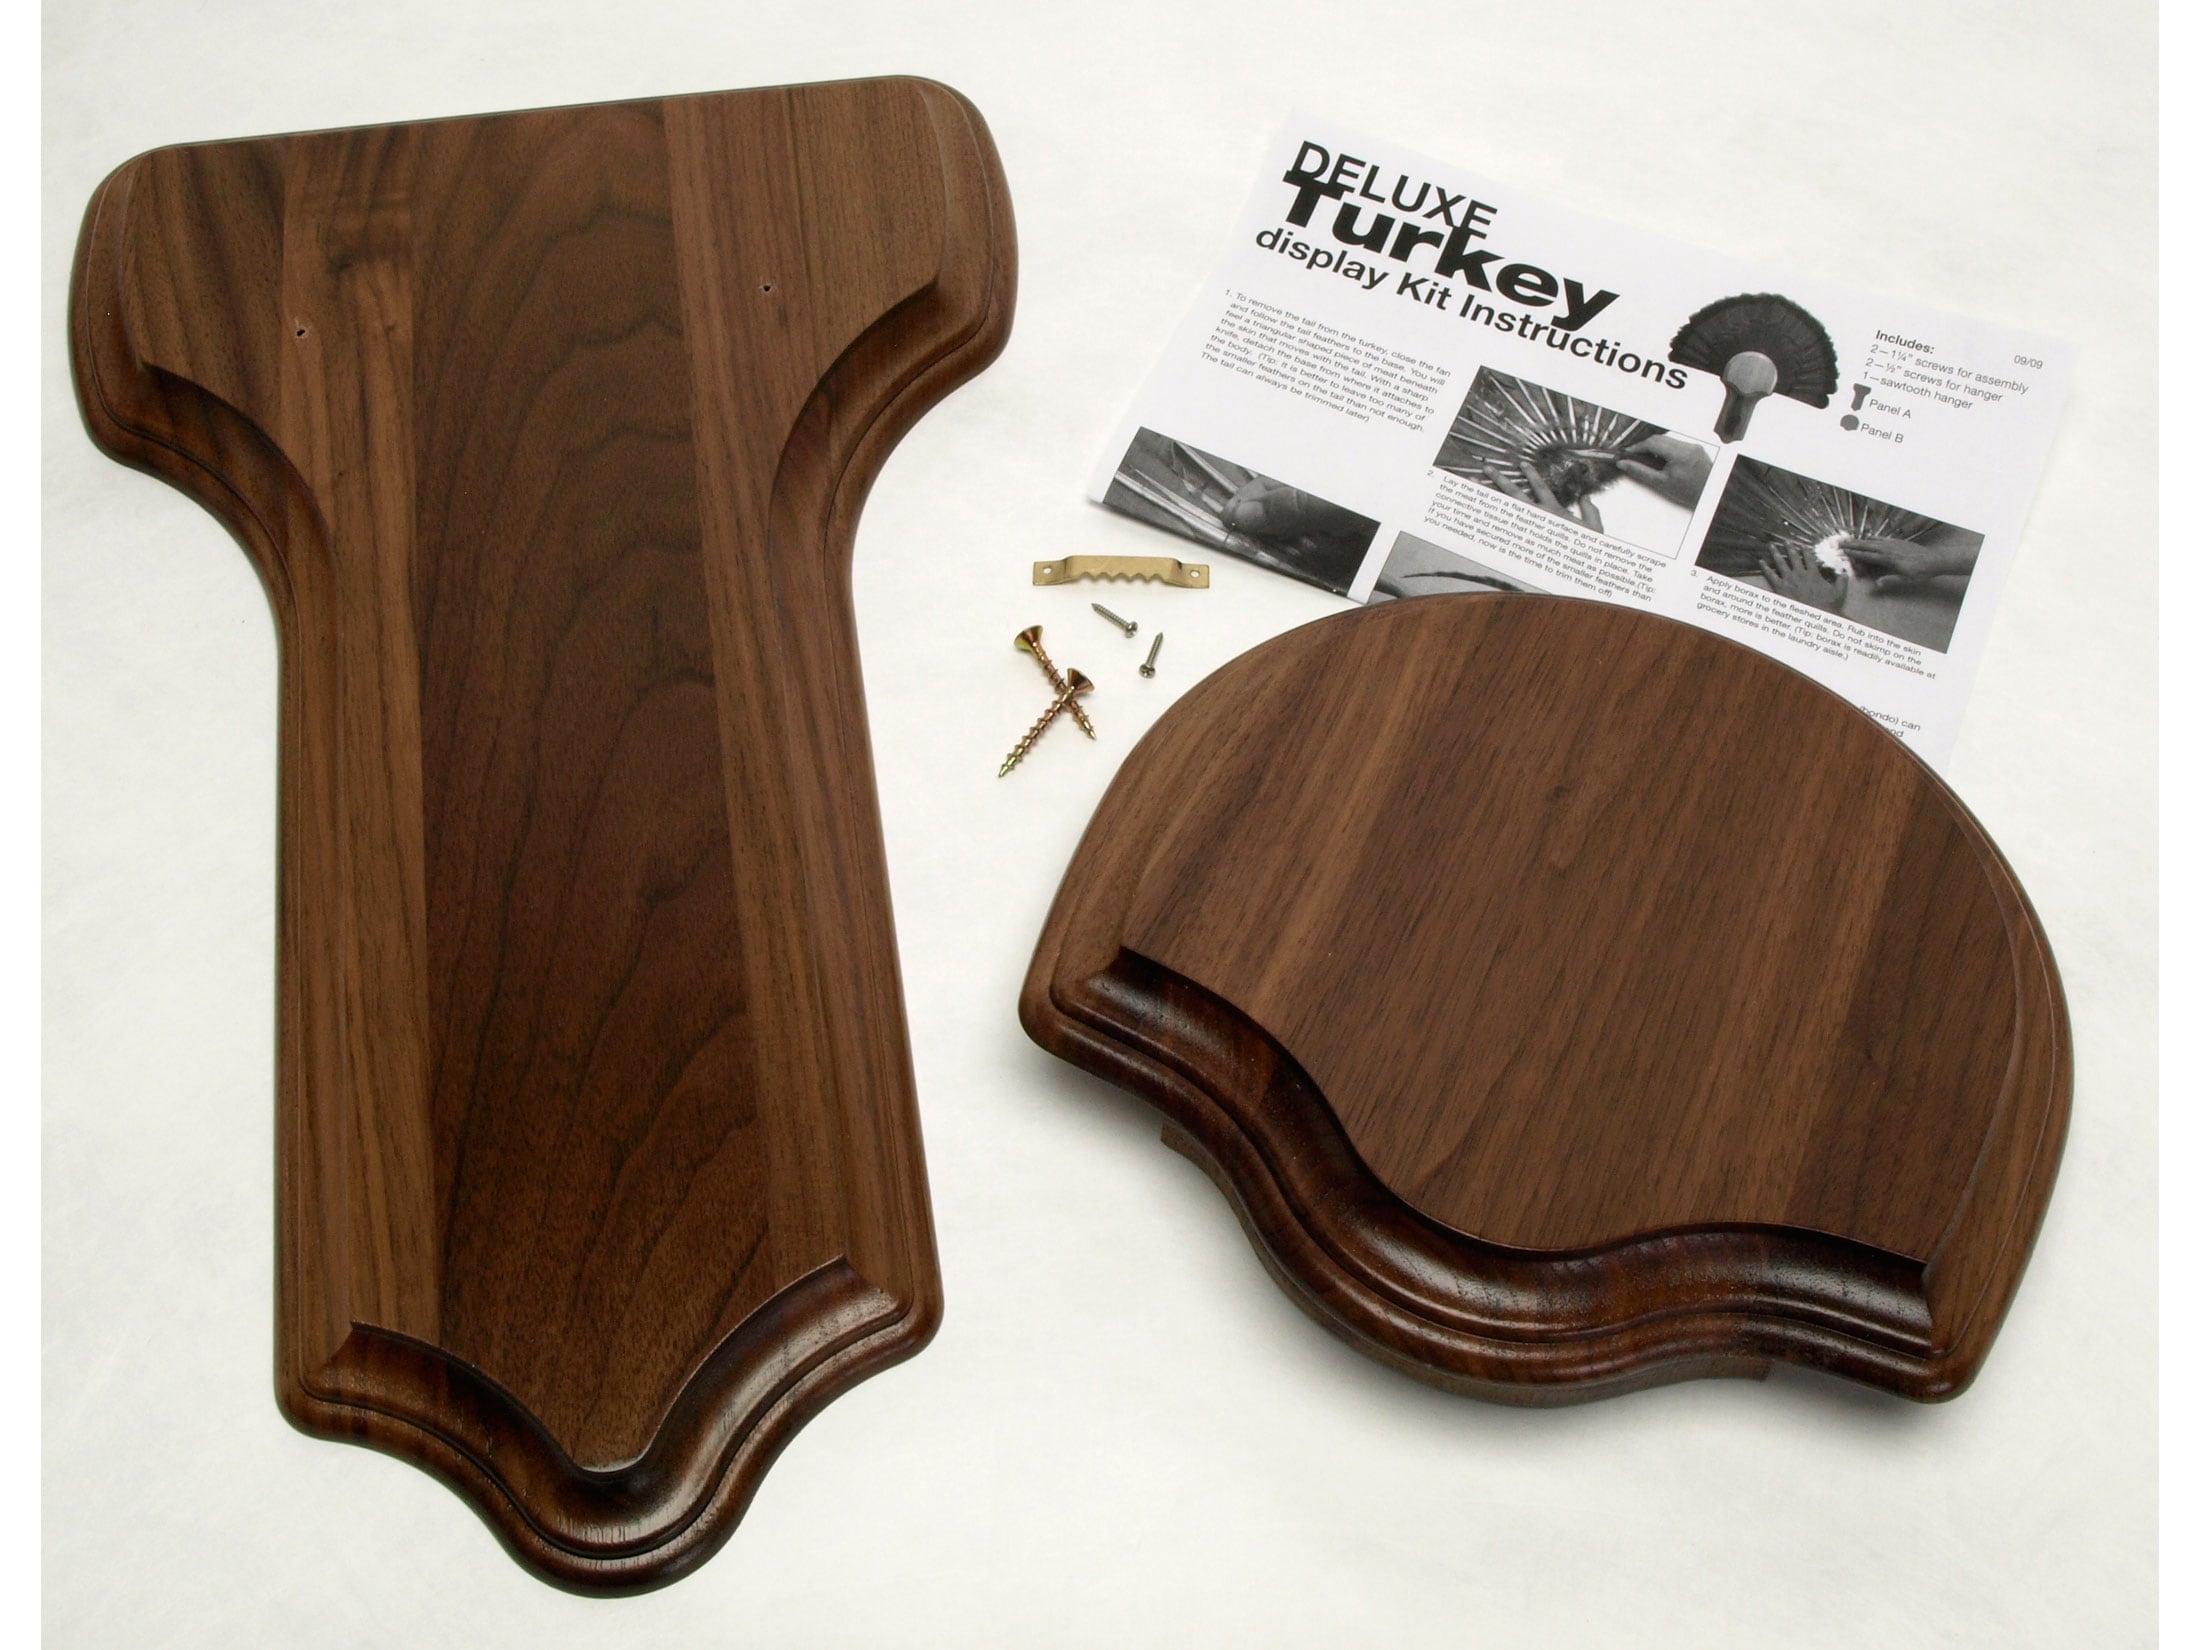 Walnut Hollow Country Deluxe Turkey Mounting & Display Kit in Solid Cherry